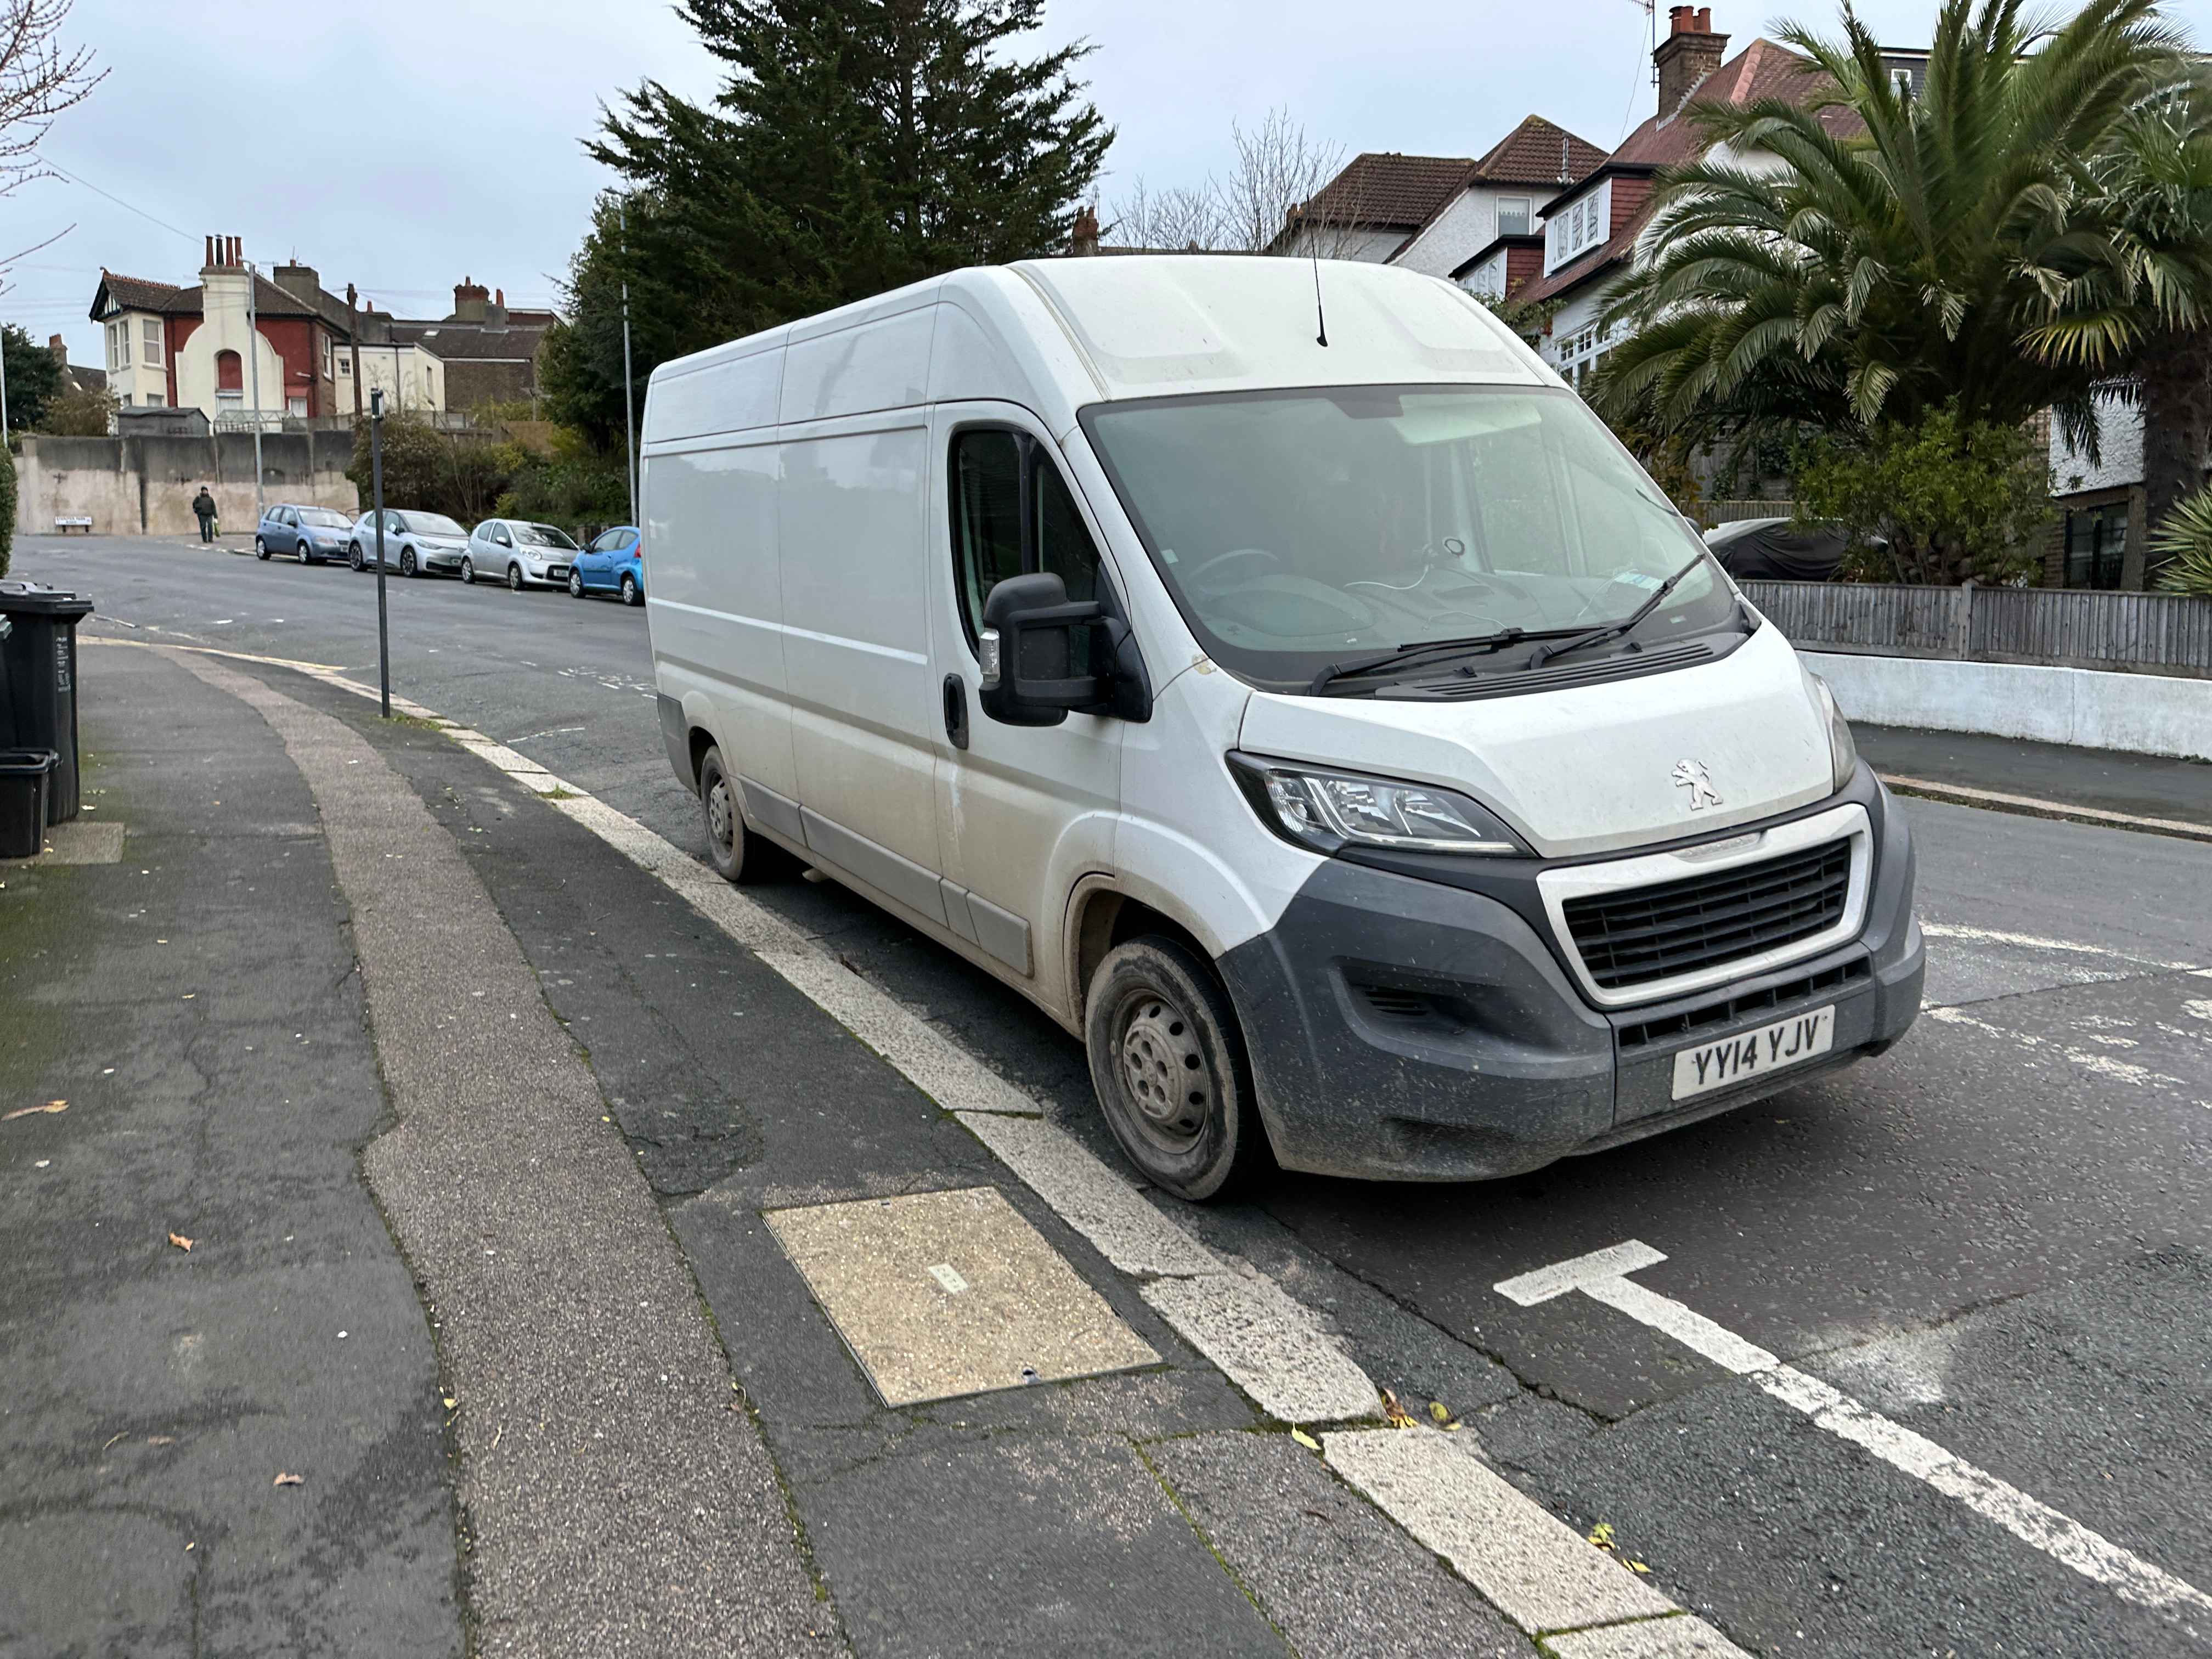 Photograph of YY14 YJV - a White Peugeot Boxer parked in Hollingdean by a non-resident. The first of three photographs supplied by the residents of Hollingdean.